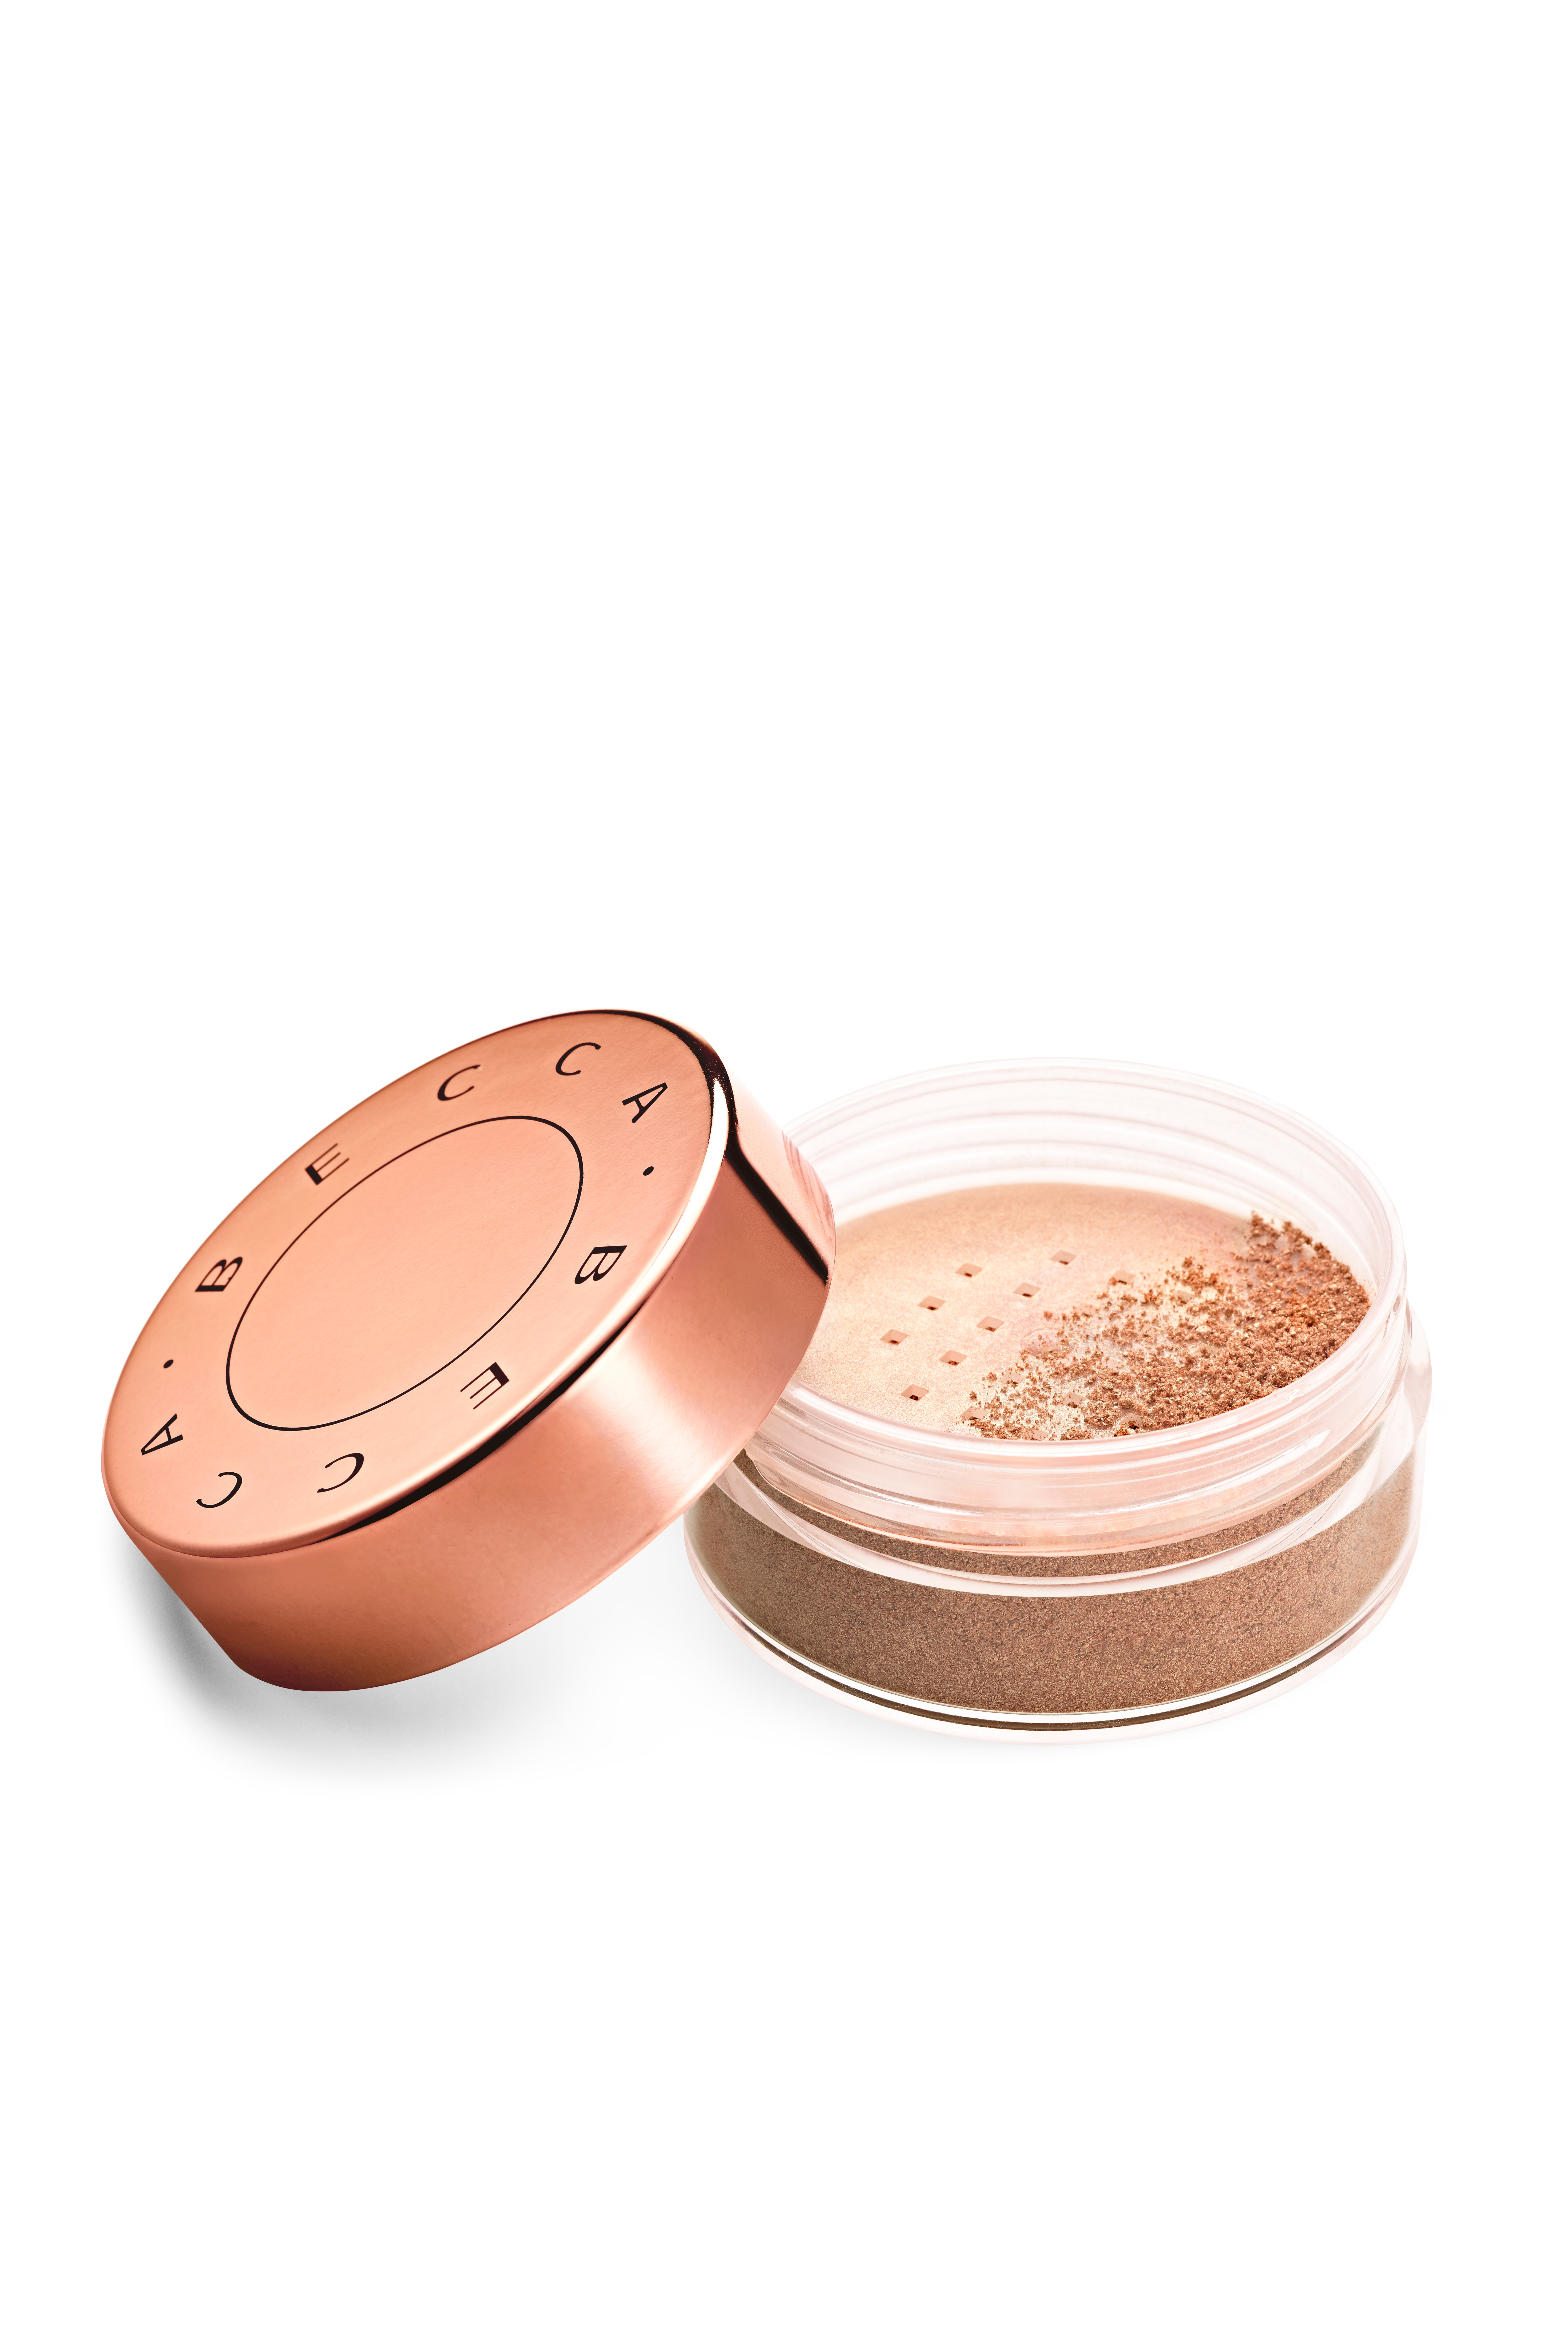 BECCA Cosmetics Champagne Pop Highlighter Drop Collectors Edition Beauty Makeup 